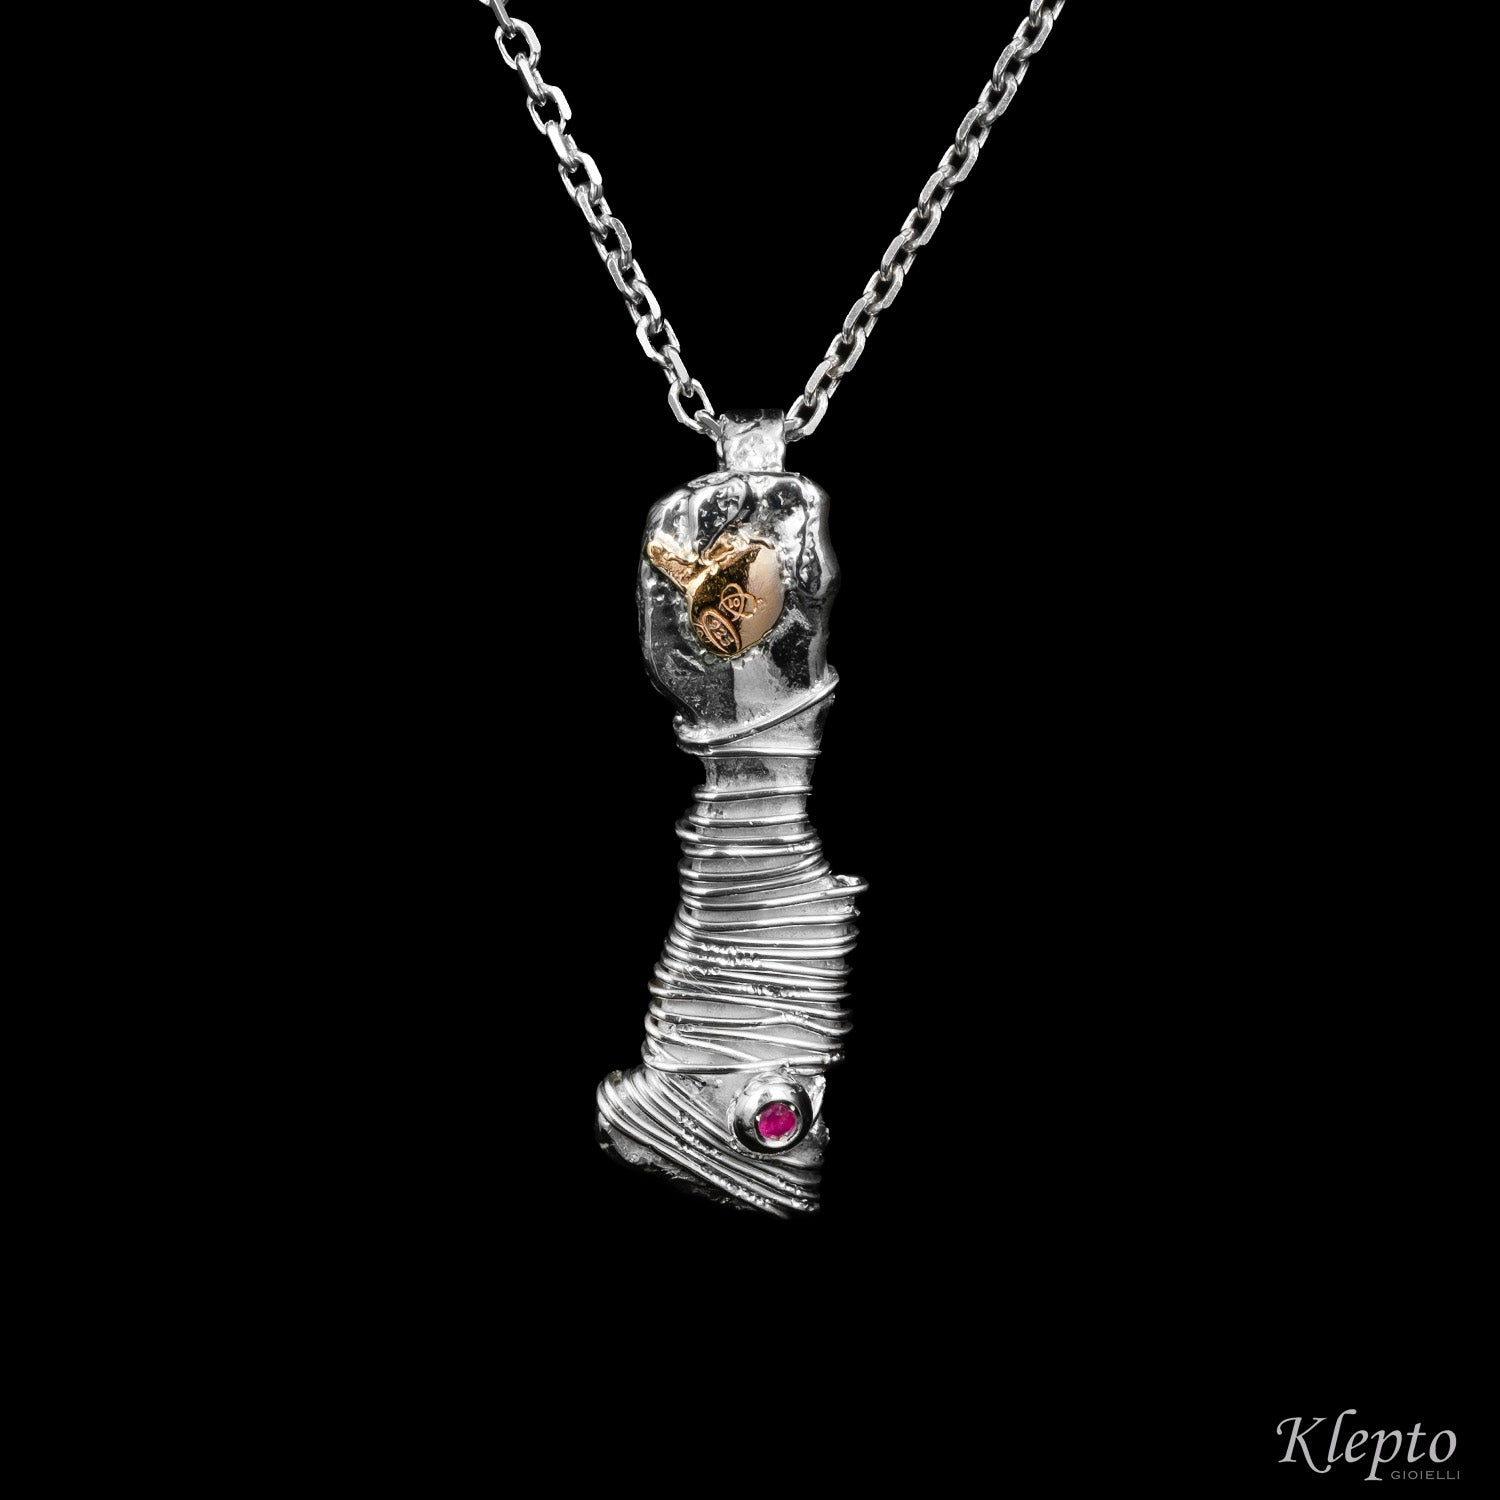 Silnova® "Cosmic" Silver Pendant with Ruby and rose gold detail